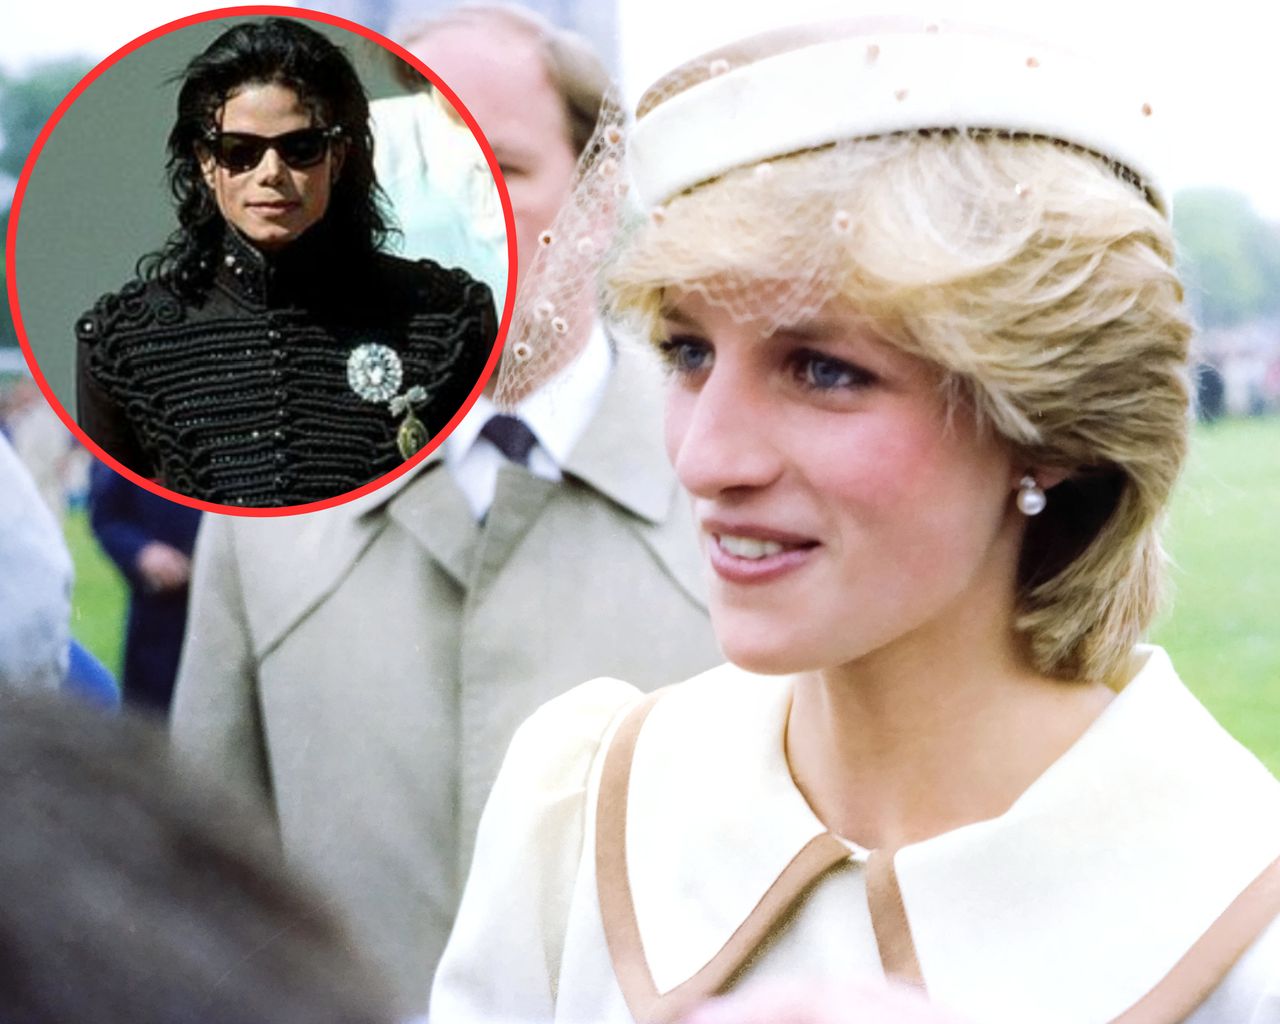 Michael Jackson's unrequited love for Princess Diana revealed in conversations with a trusted friend